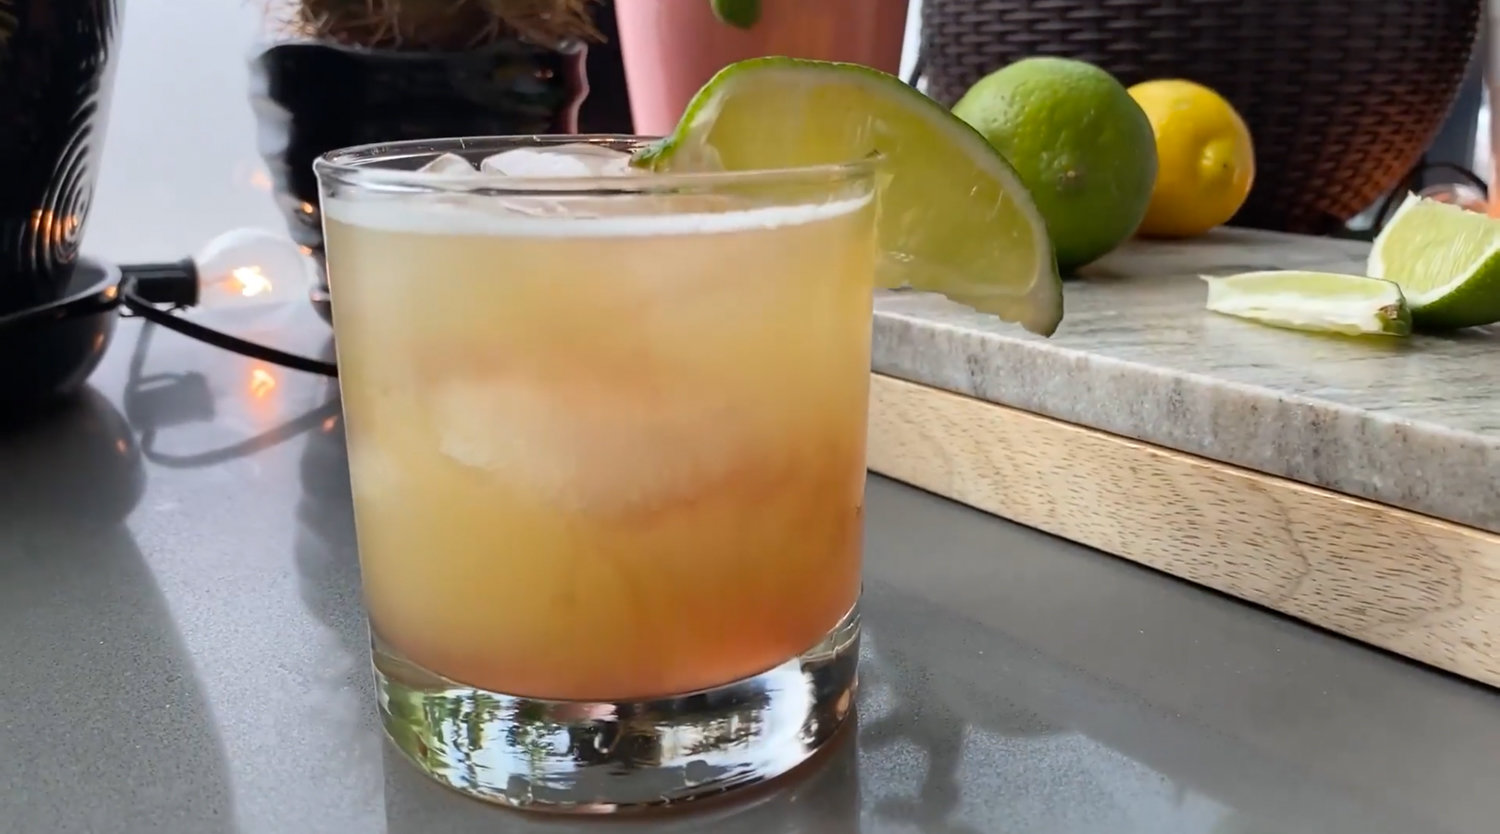 As part of its ‘Happy Hour at Home’ online program, the New York Botanical Garden instructed viewers on how to make the ‘sunset orchid’ cocktail, which was then followed by a detailed look at the garden’s annual orchid show.